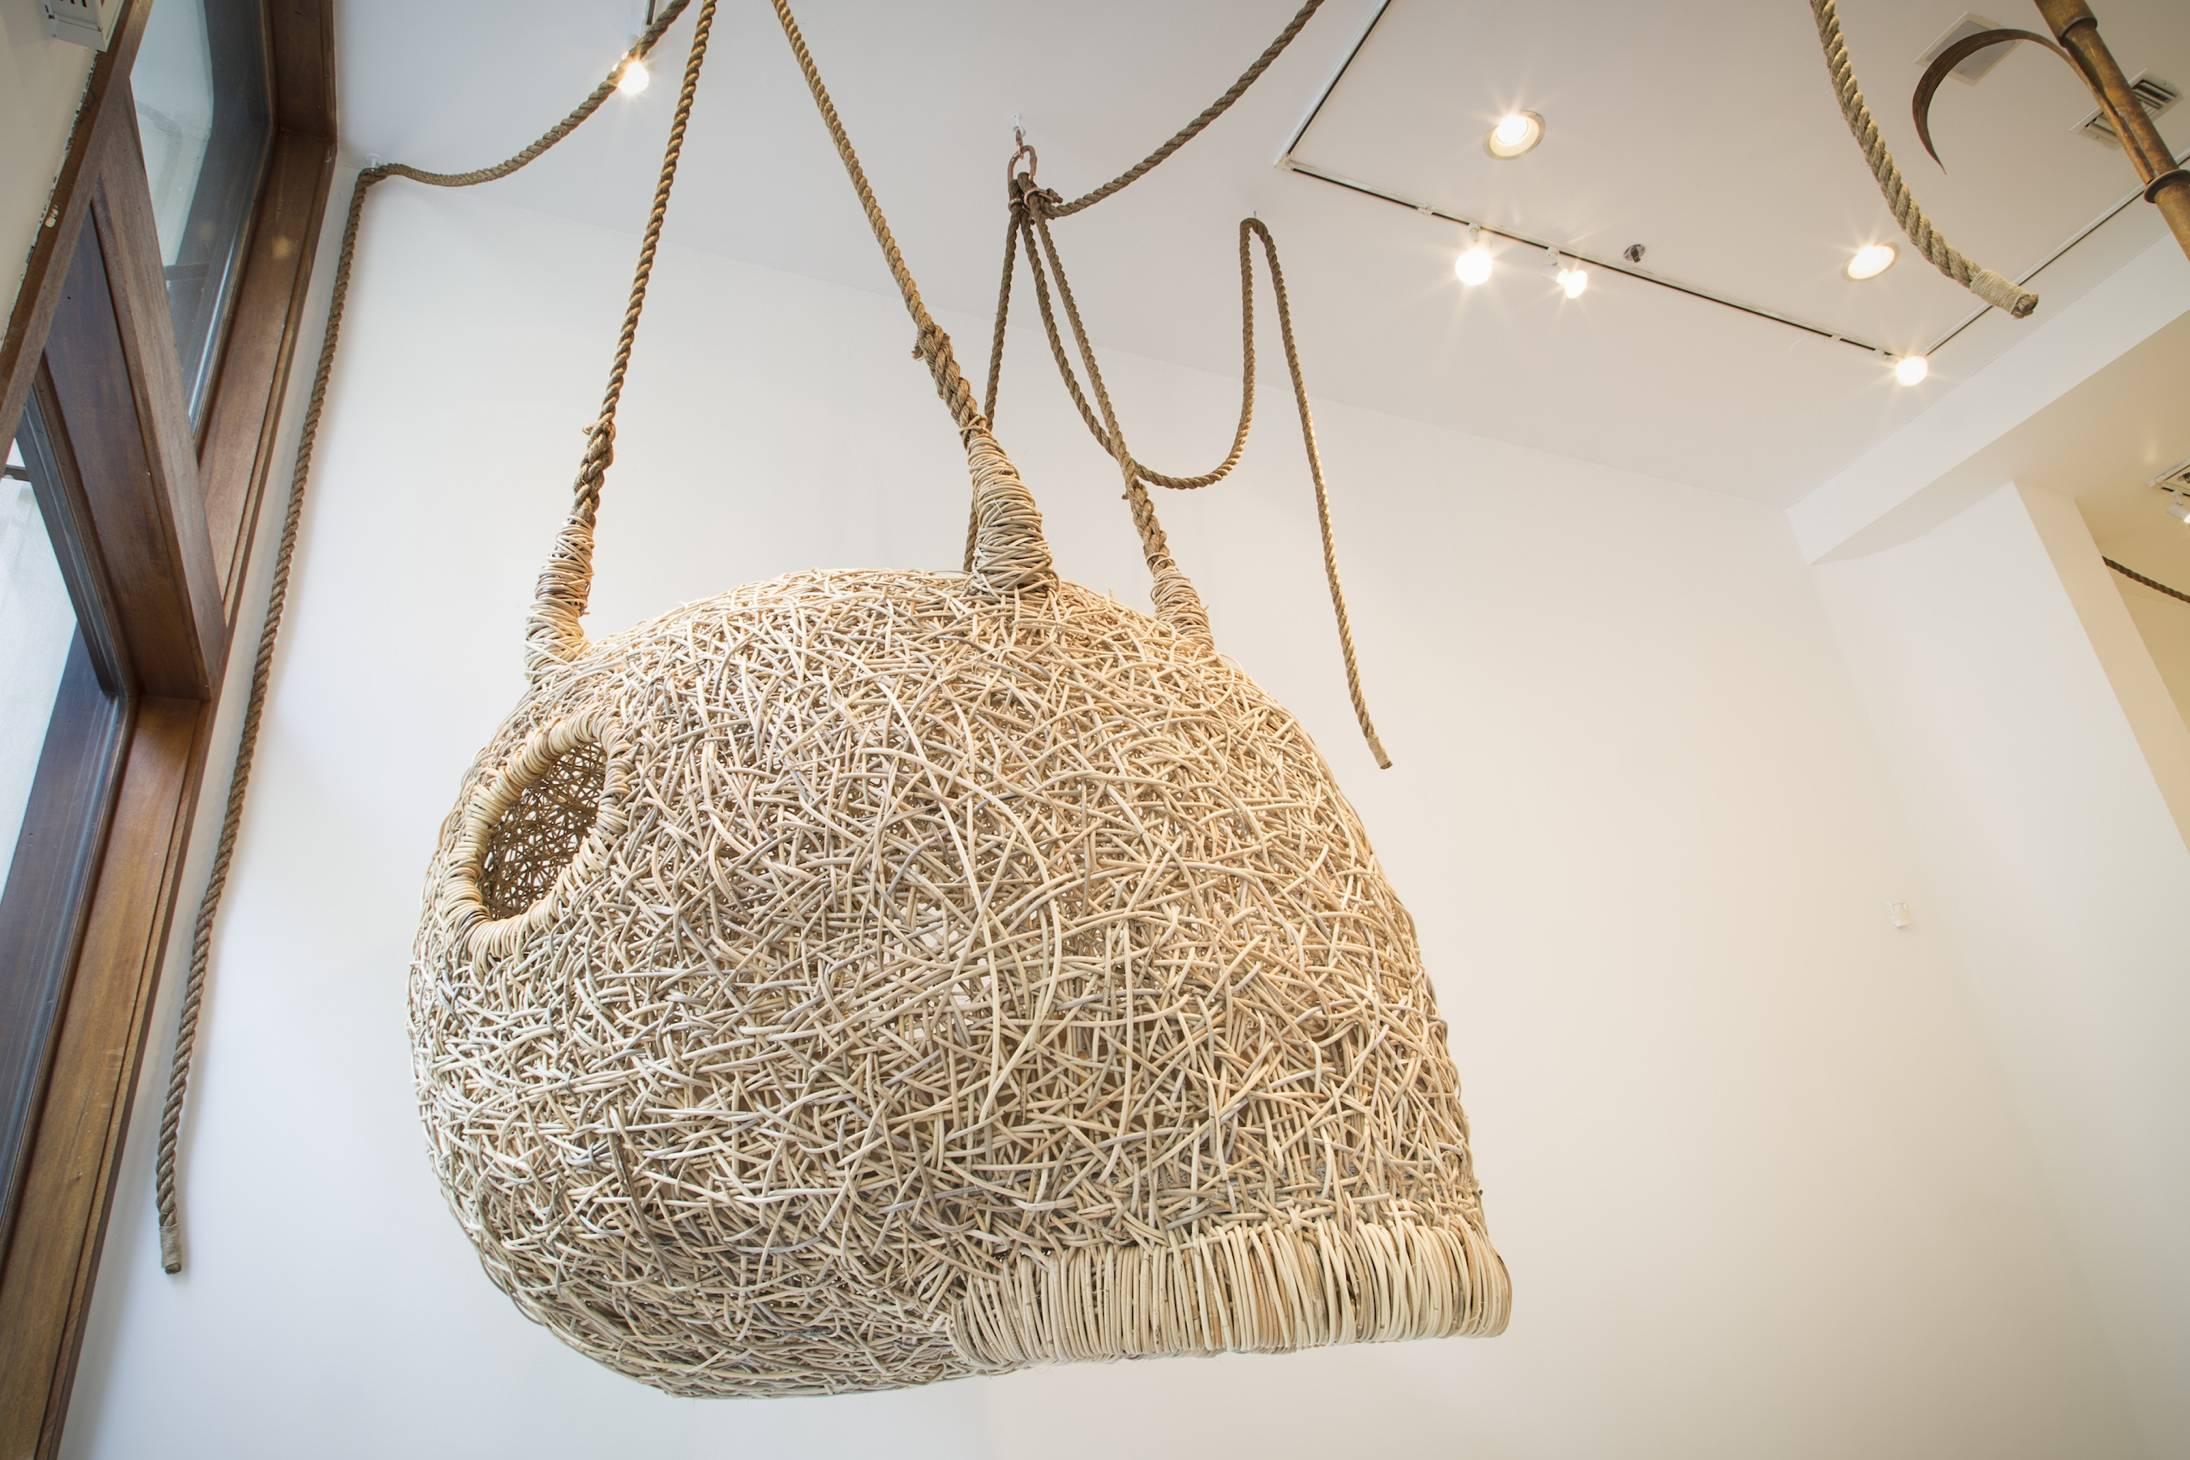 Unique, custom hanging nest sculpture in woven cane with metal framing and jute ropes. Designed and made by Porky Hefer, South Africa, 2015.